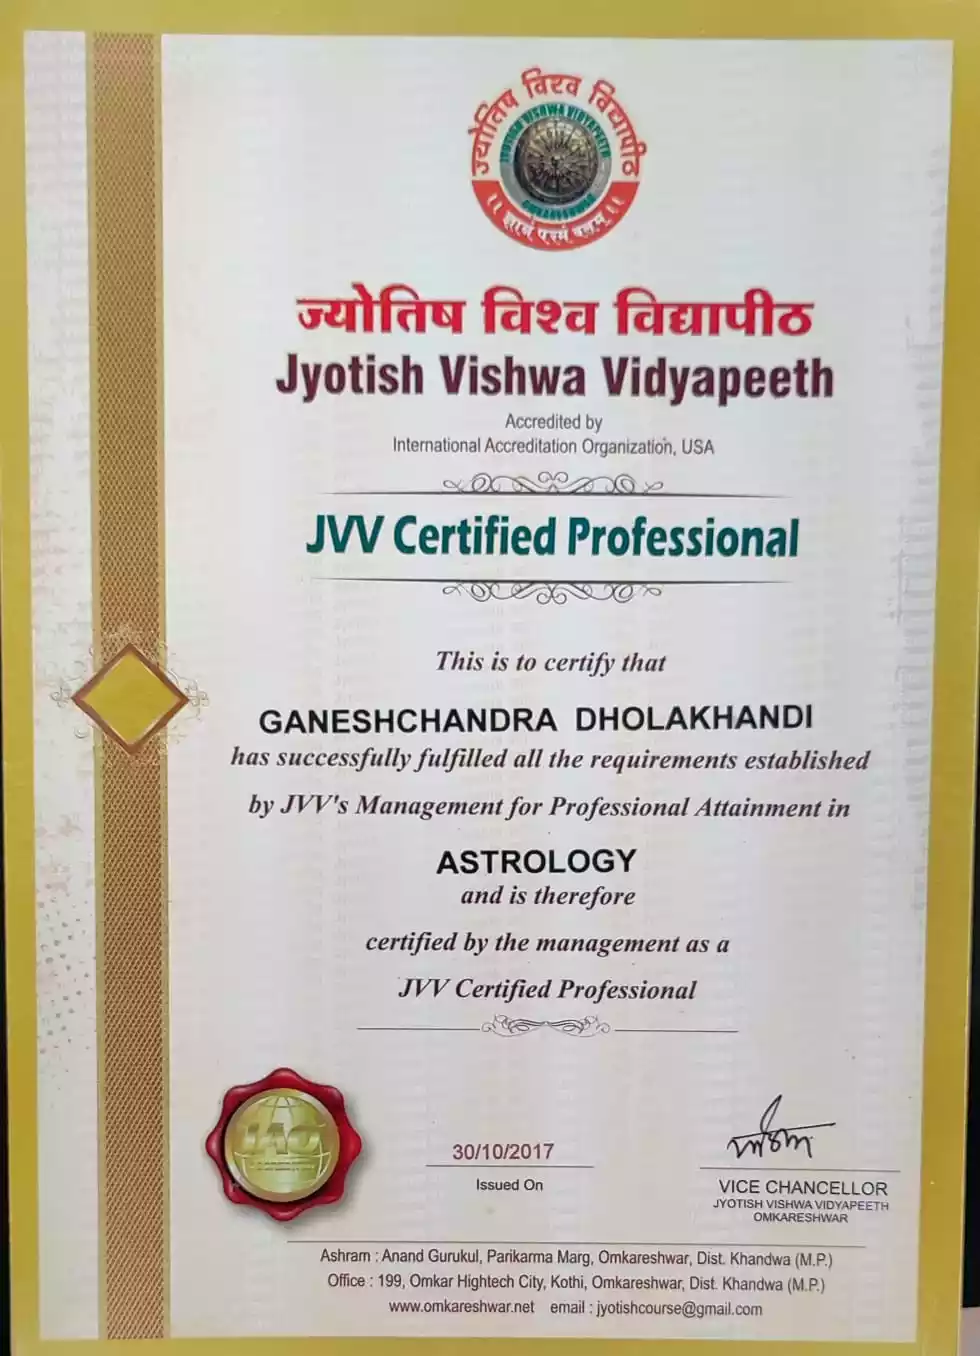  Certificate of Professional